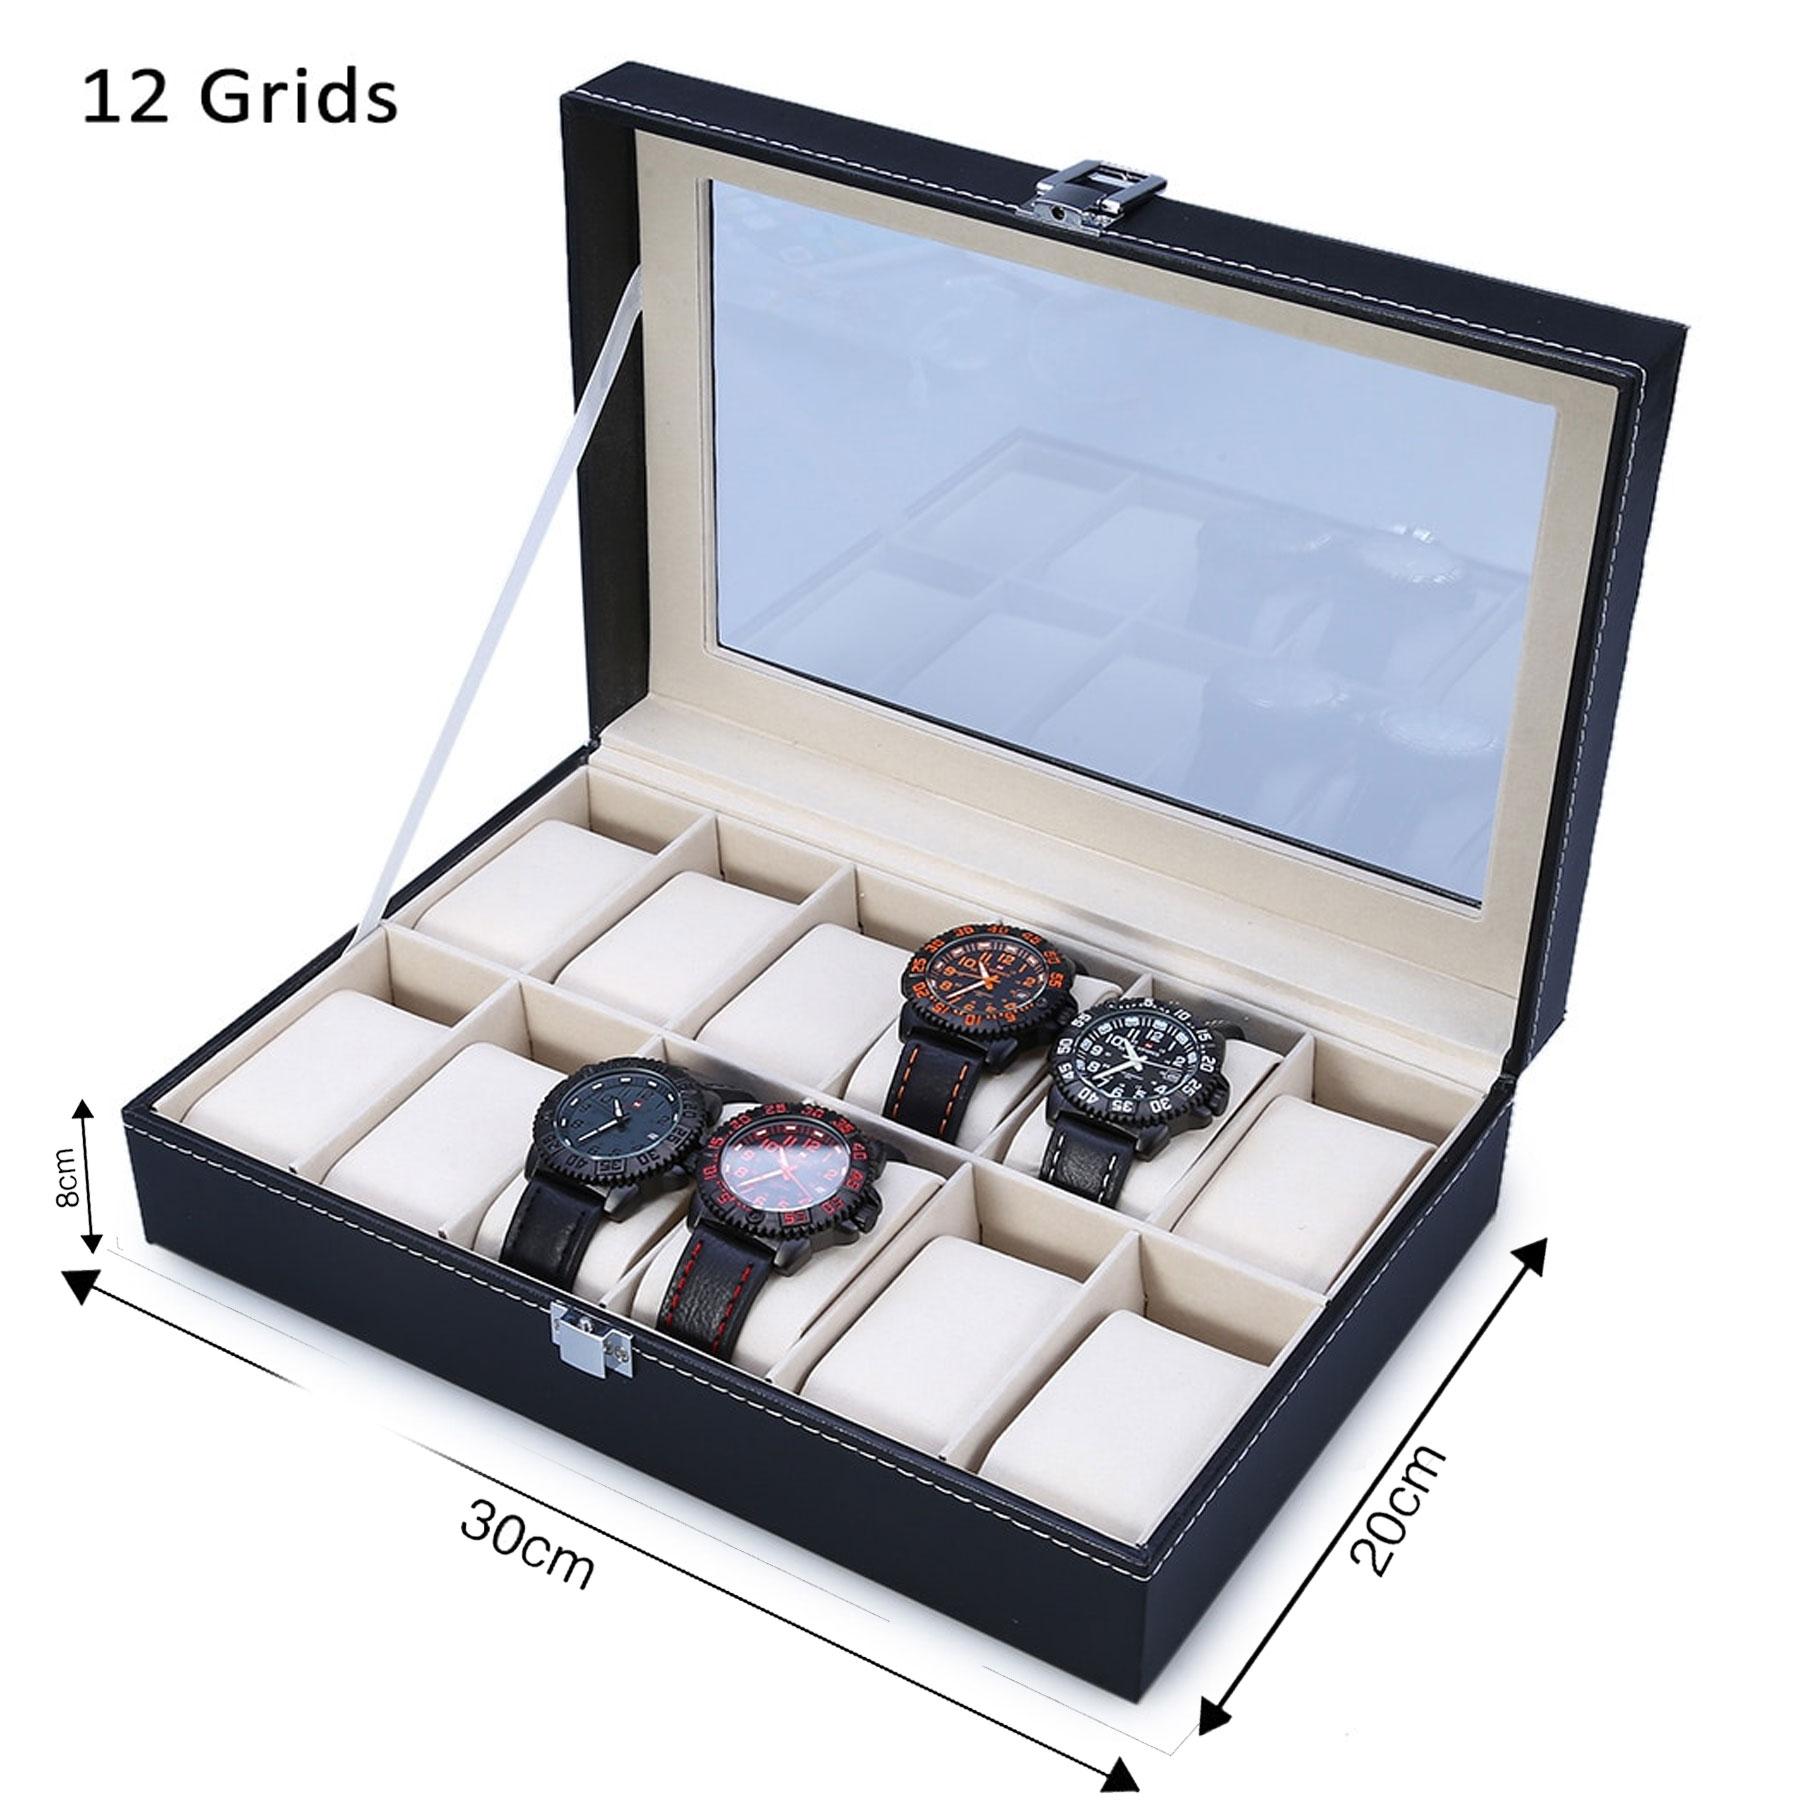 12-Slot Black Jewelry Display Showcase for General Bracelets Watches